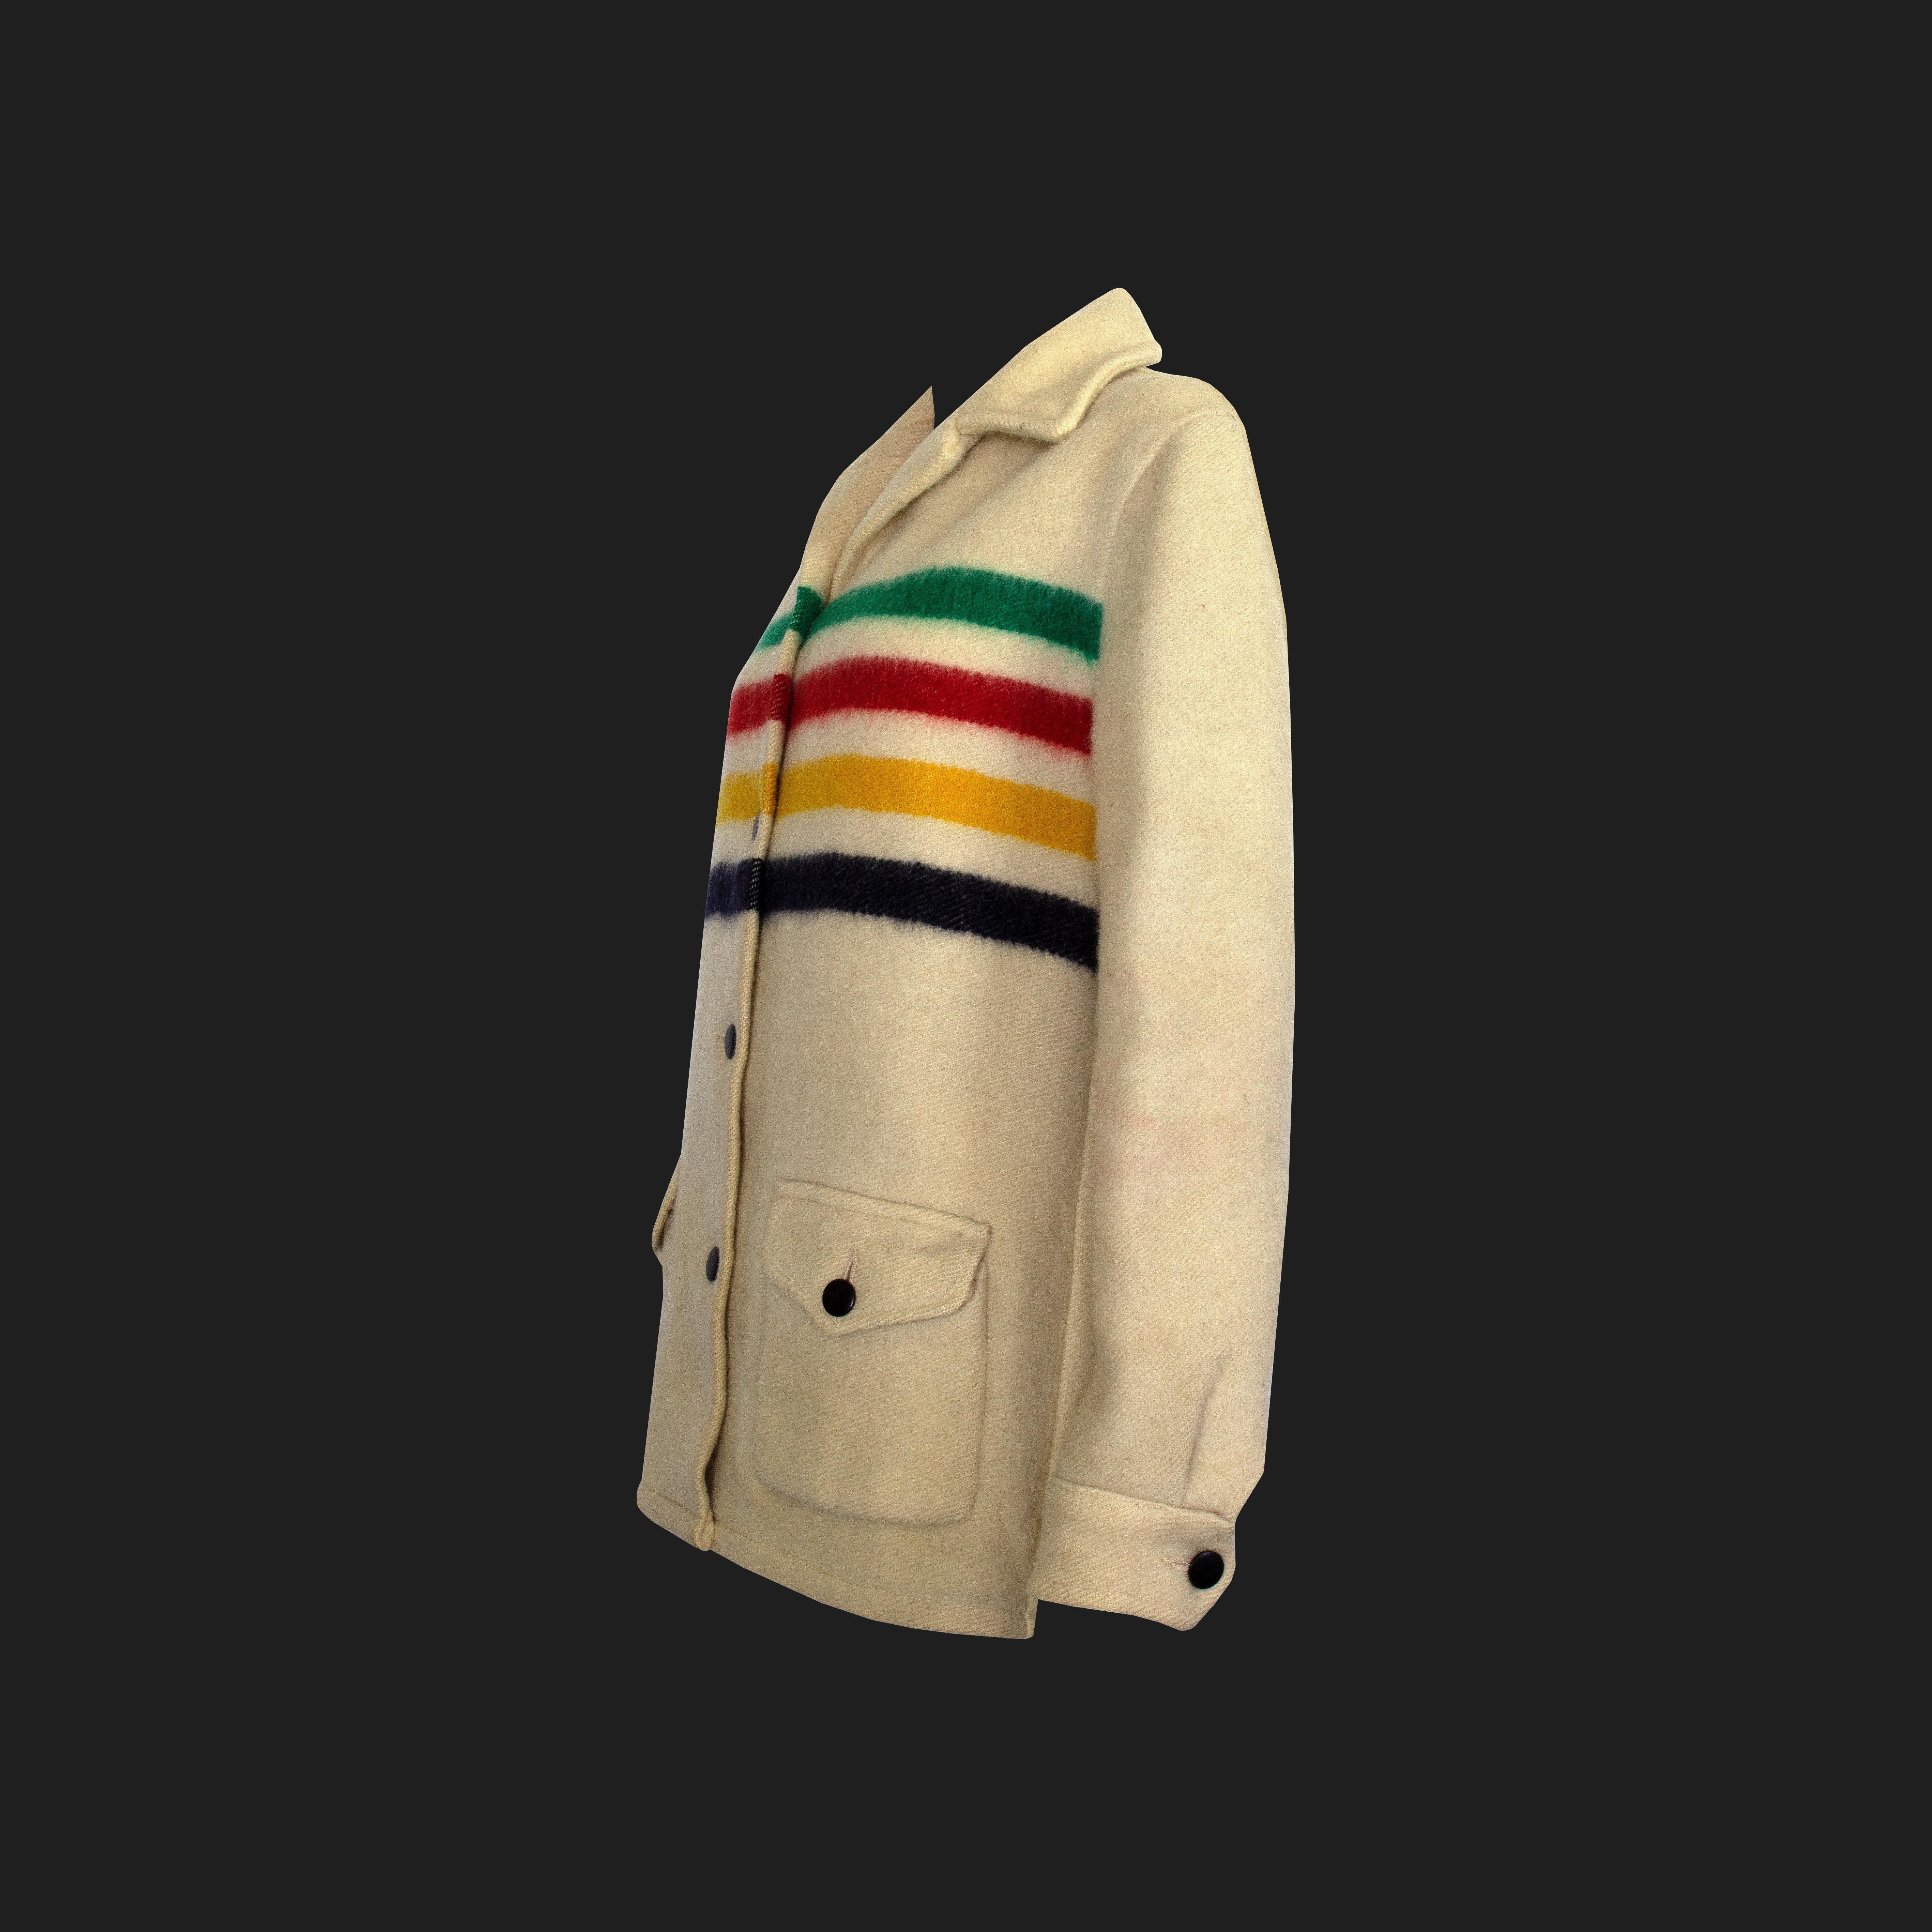 Product Details: Hudson’s Bay - RARE 1960s Vintage - 100% Wool - Made in Canada - Two-Way Collar - x 2 Front Pockets + Button Fasten - Button Closure Cuff + Front Jacket - Red, Green, Yellow + Navy Striped Detailing 
Label: Hudson’s Bay
Era: 1950s